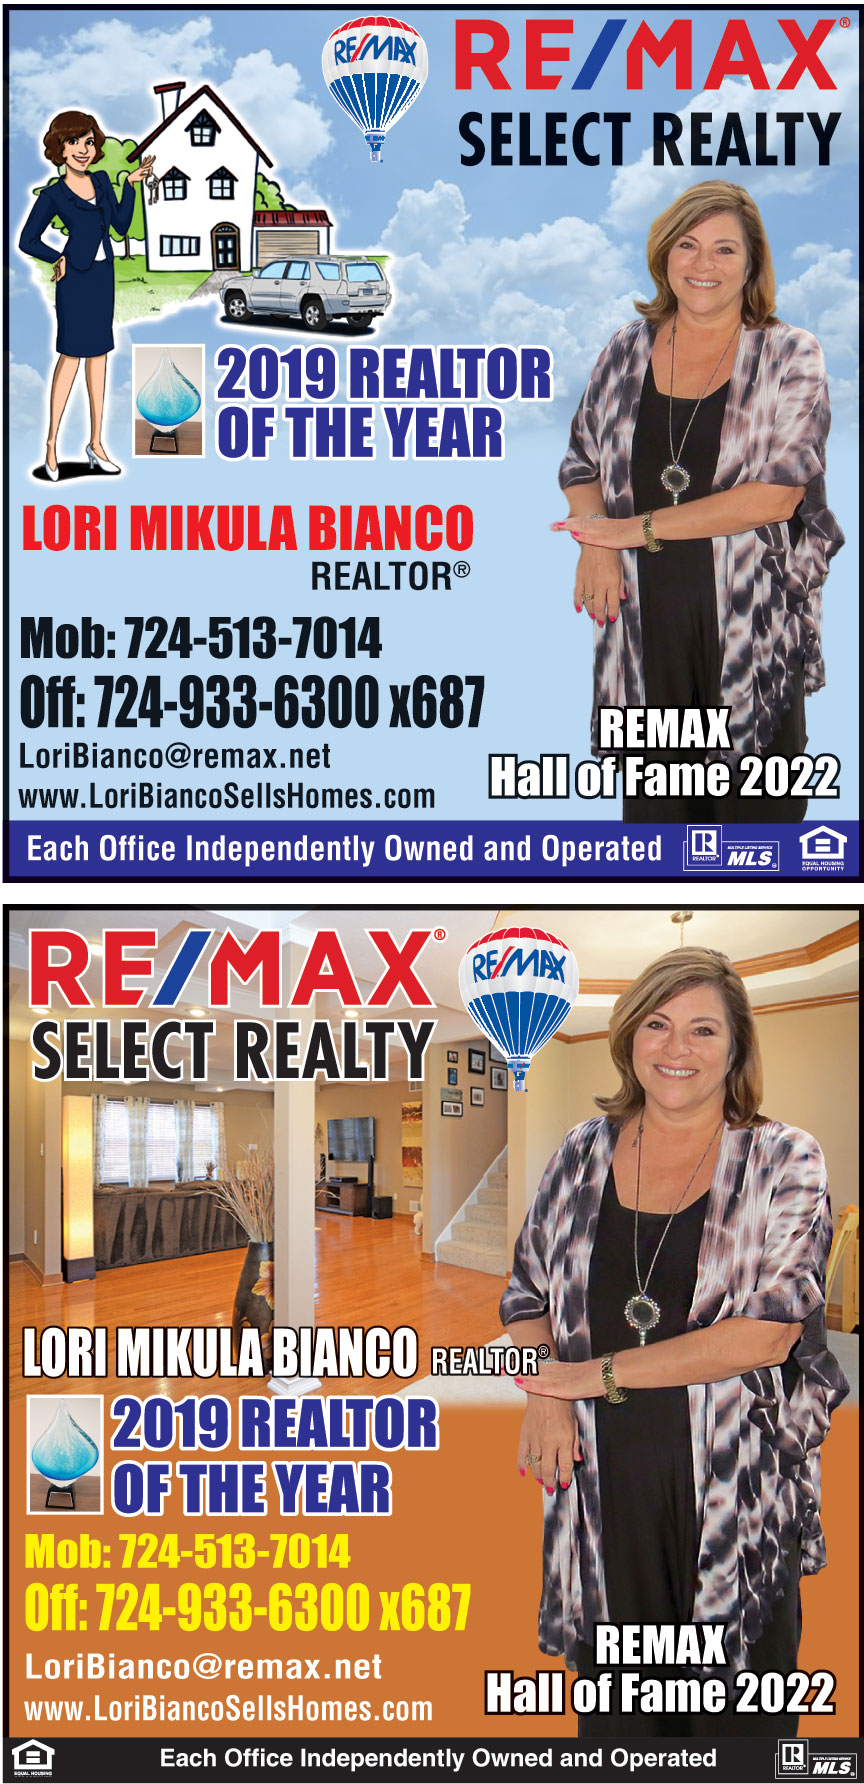 REMAX SELECT REALTY